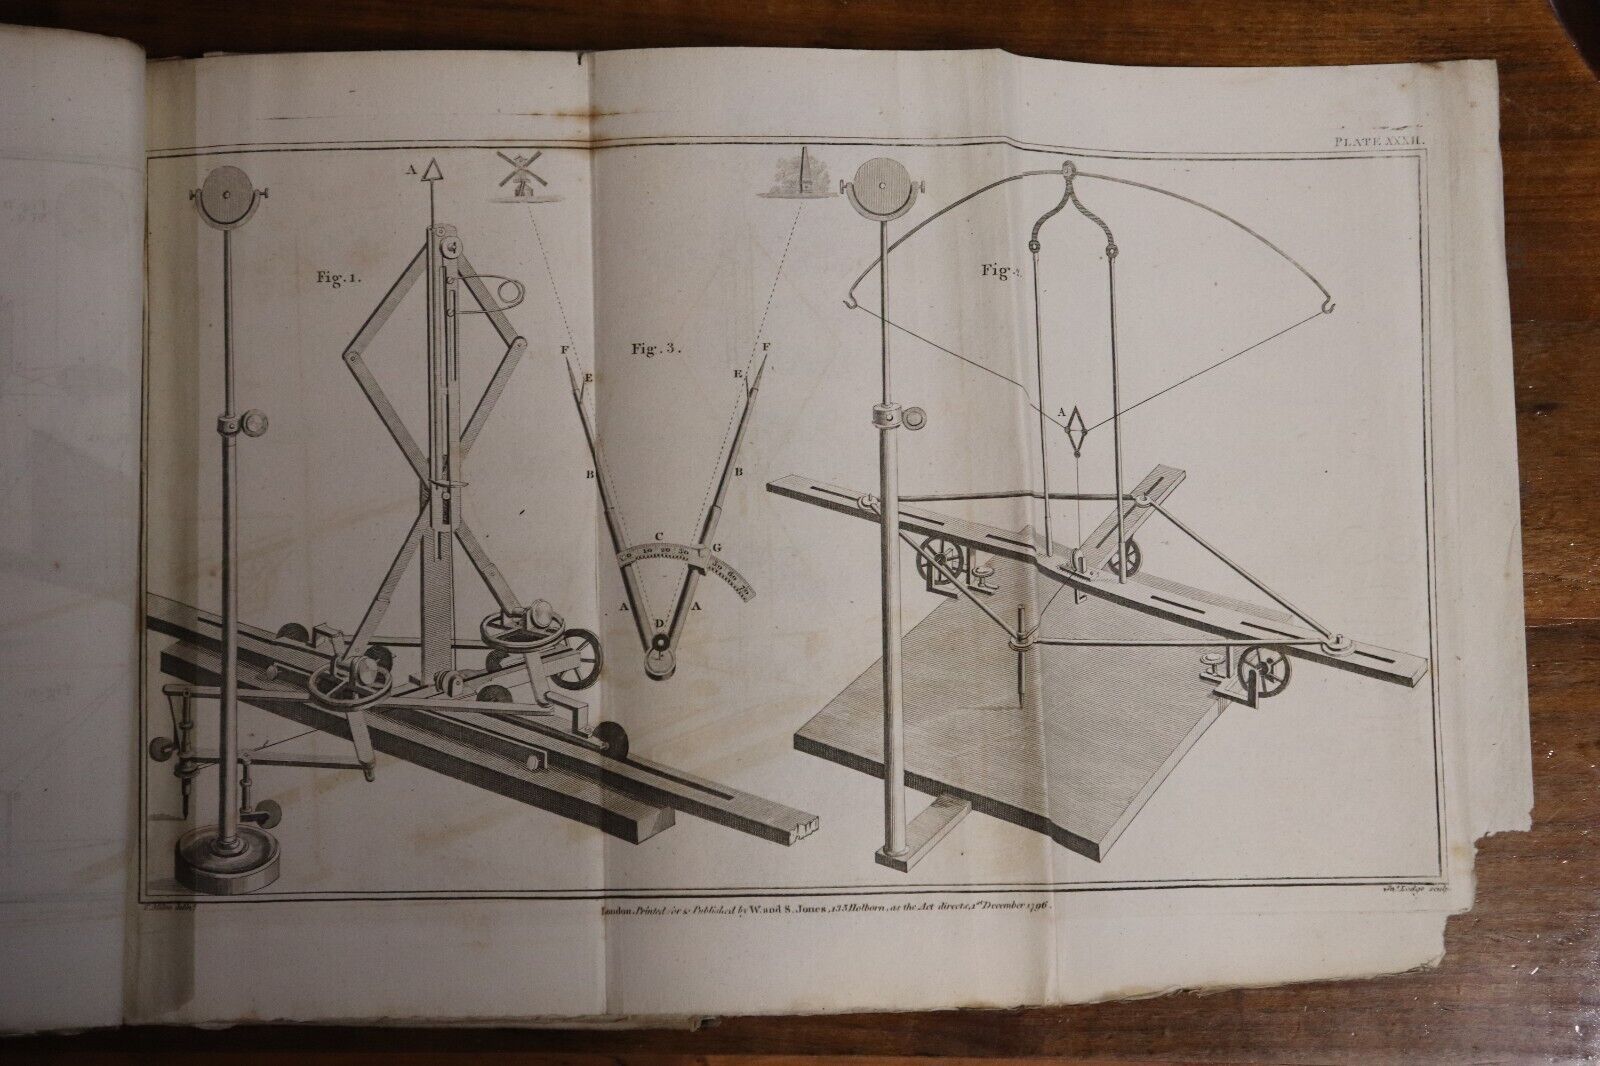 1803 Geometrical & Graphical Essays by G. Adams Antiquarian Book Folding Plates